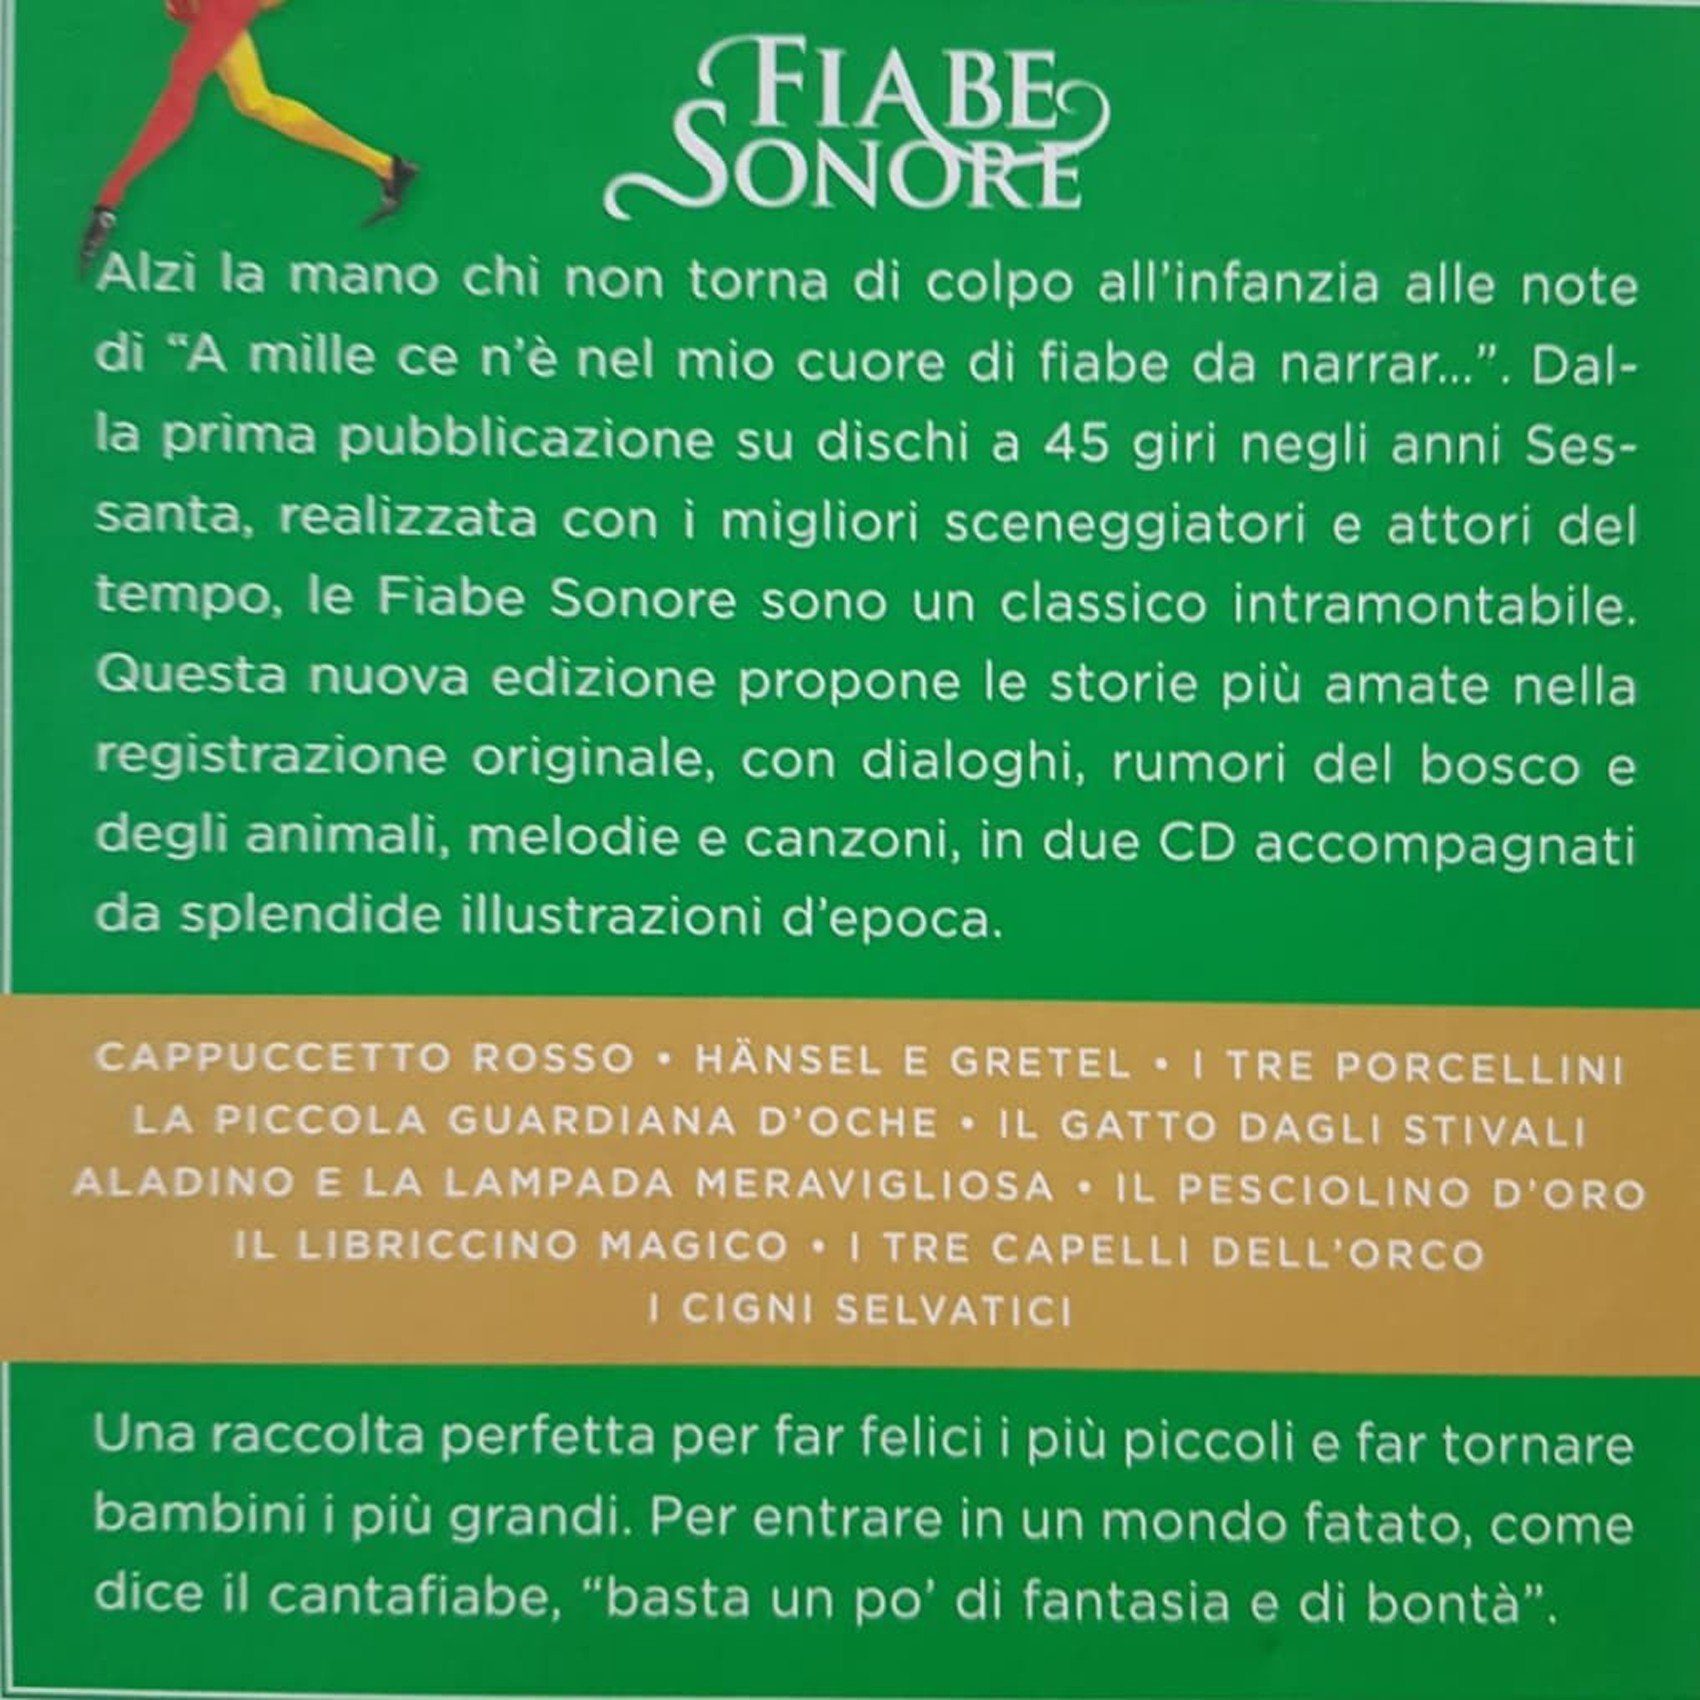 FIABE SONORE A Mille ce n'e. - VOLUME SECONDO Very Good, 4+ Yrs Olga  (6582235791545)